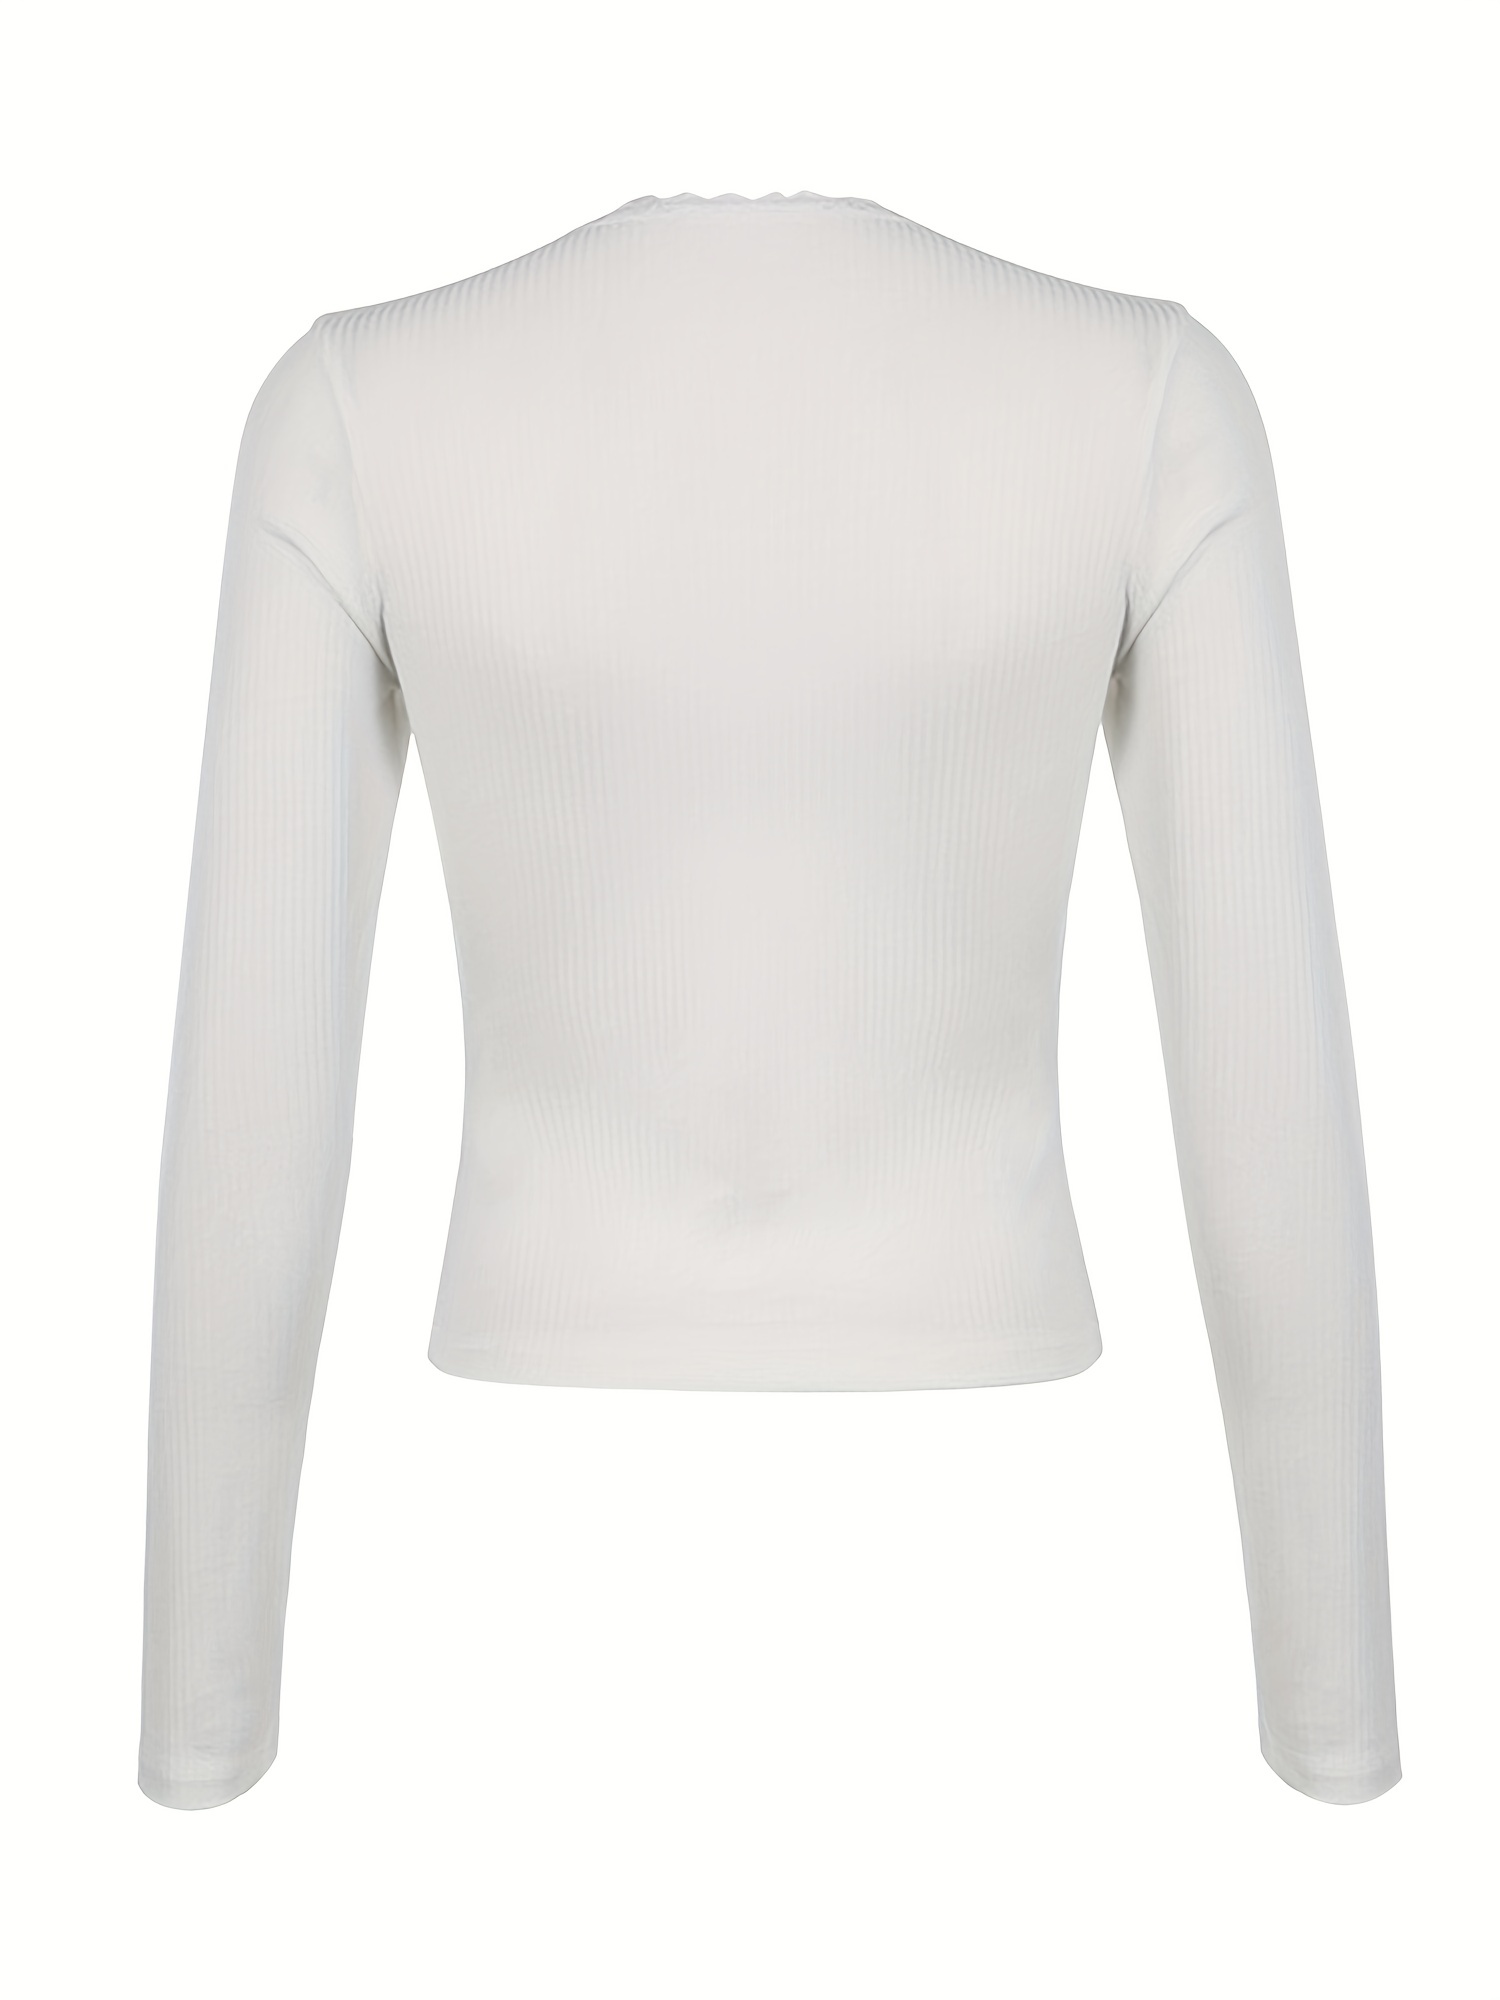 PMUYBHF Womens Fashion Womens Ribbed Turtleneck Base Layer under Shirts  Long Sleeve Top Long Sleeve Shirts for Women Dressy Fitted White Long  Sleeve Shirts for Women Cotton 10.99 